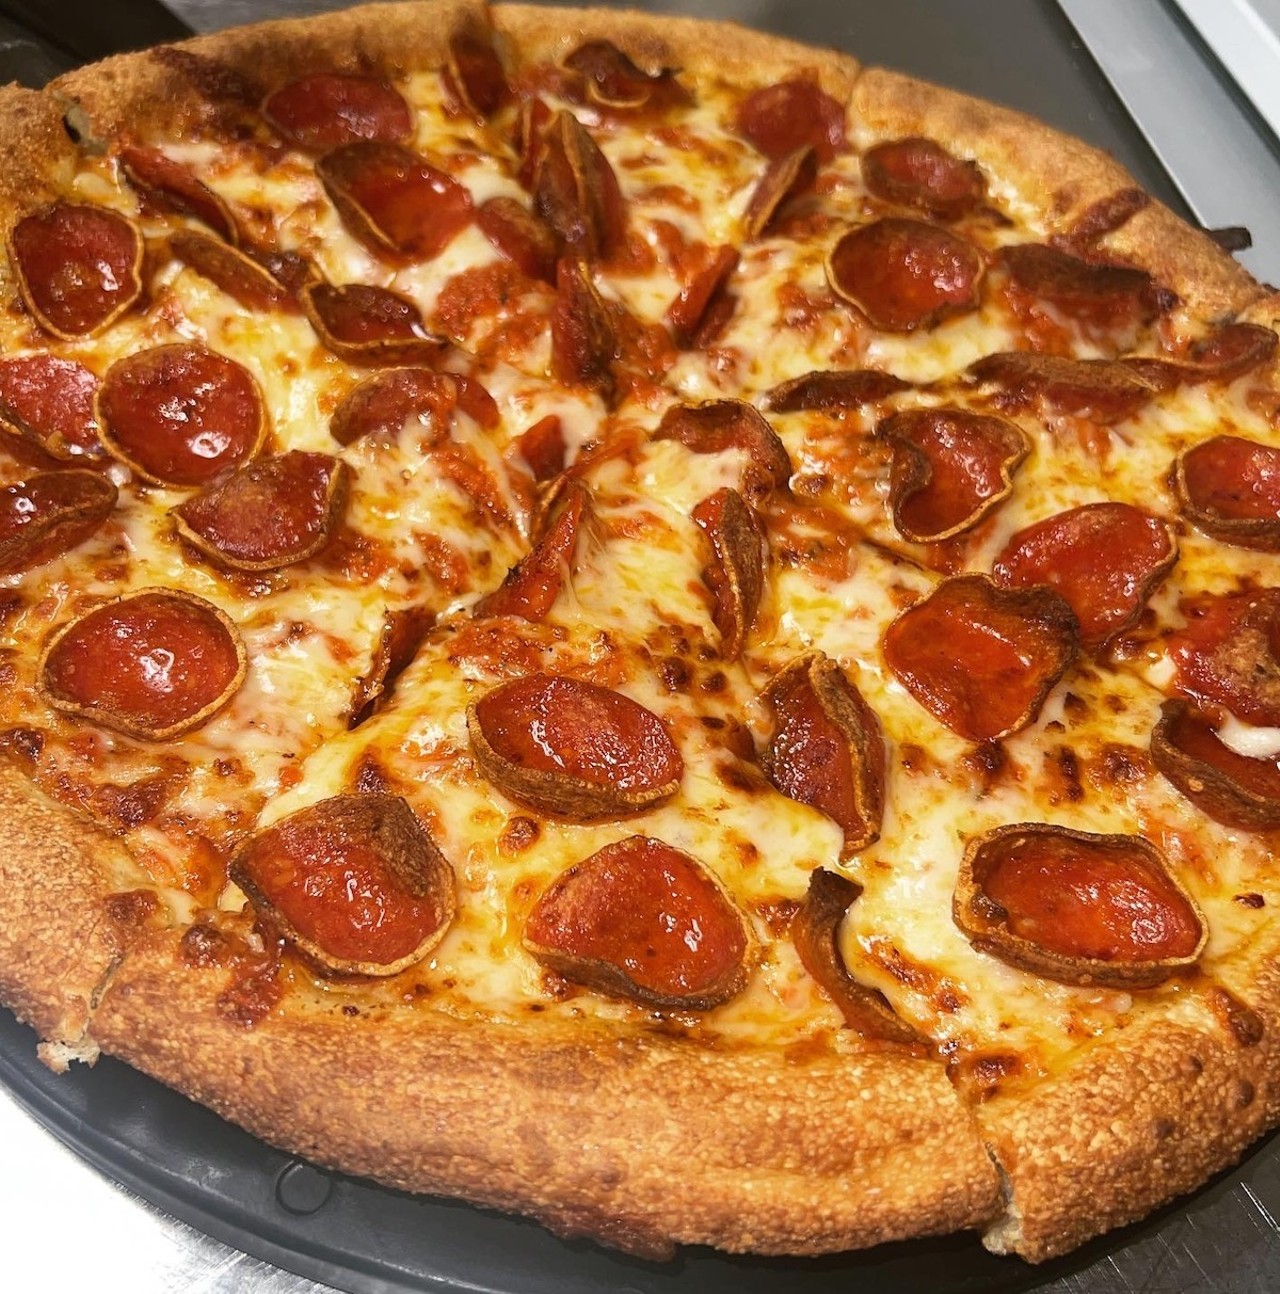  Jo Jo Carloni’s 
627 W. Bagley Rd., Berea
Jo Jo Carloni’s is offering their perfect pepperoni pizza. An 8 slice pizza with homemade, hand pressed secret recipe dough, topped with Gräńde mozzarella & provolone cheese blend, crispy pepperoni cups, all baked to golden perfection!